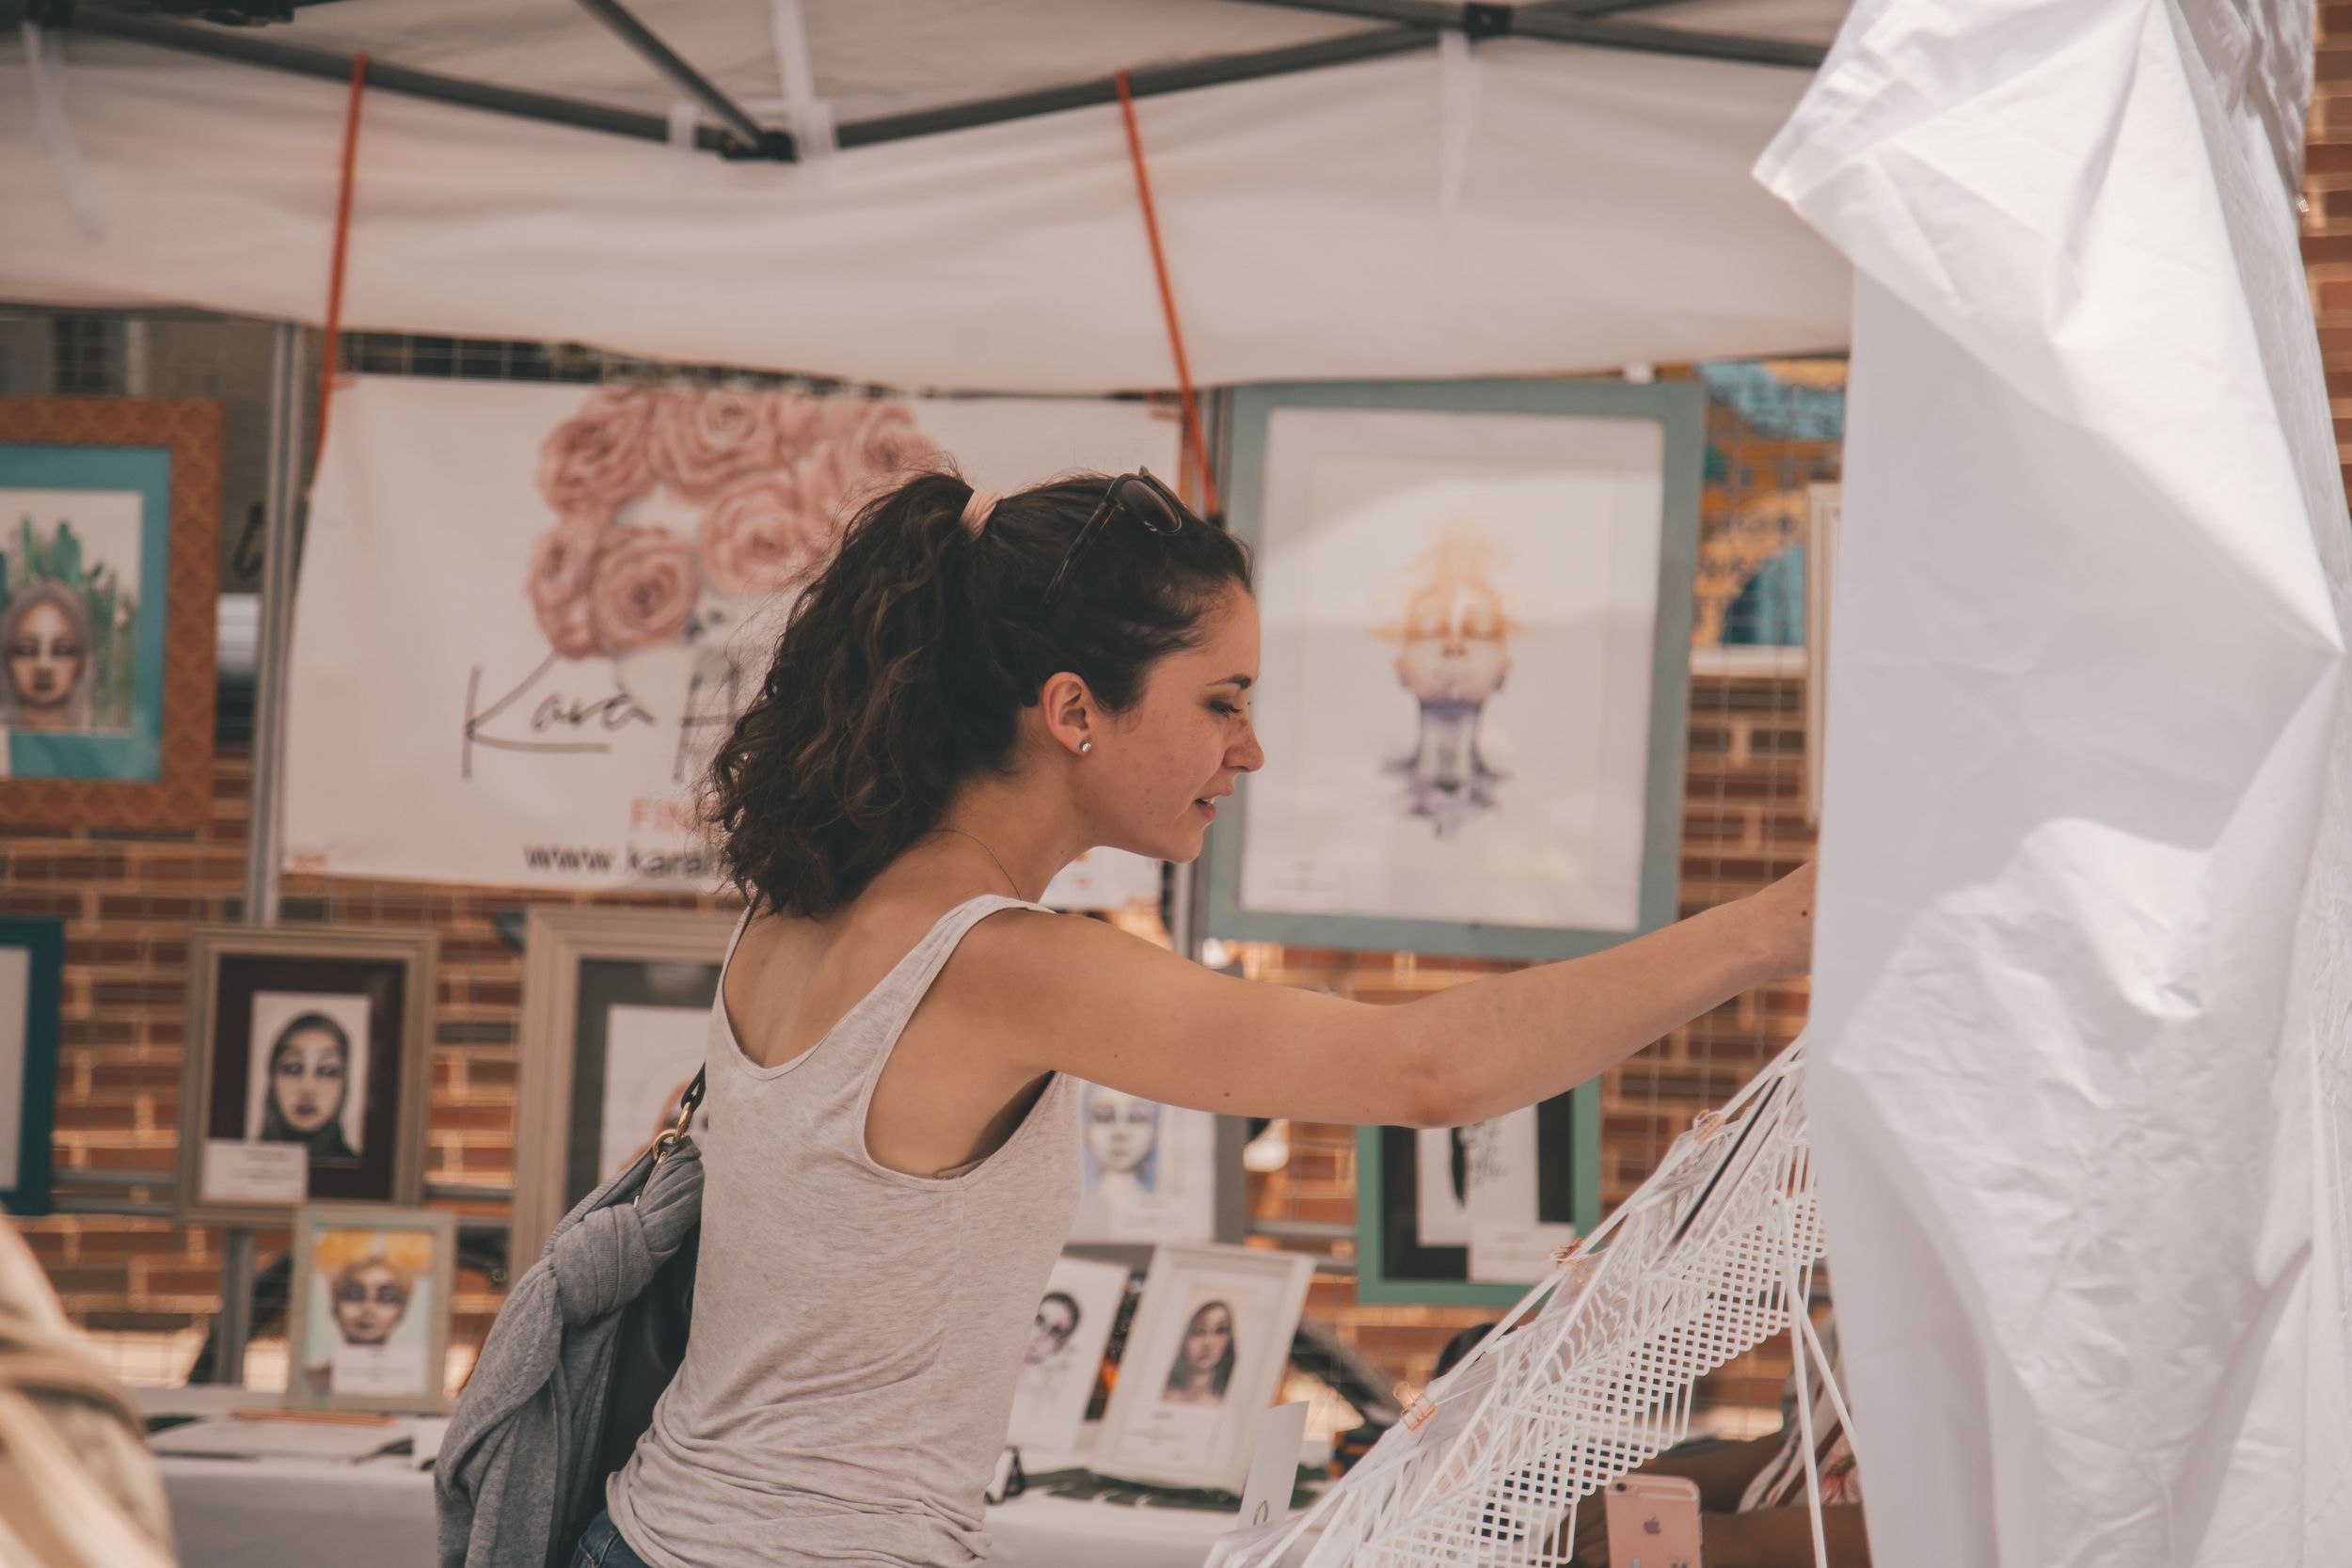 Woman enjoys an artist's booth in a white tent outside.